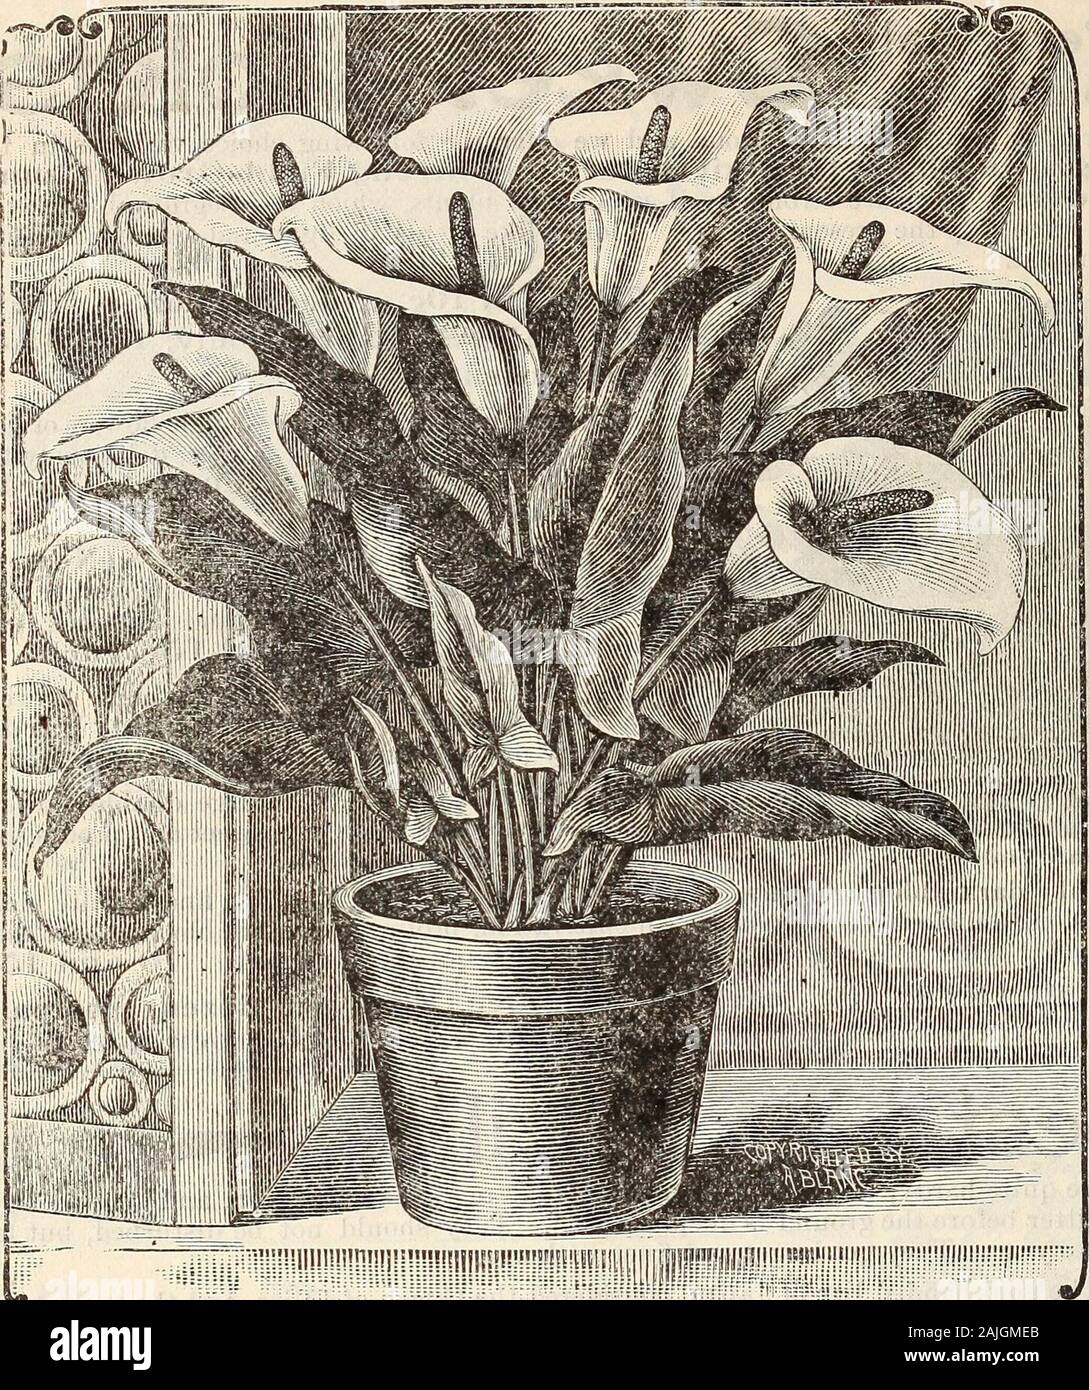 New floral guide : autumn 1899 . IMy Auratum, 32 THE CONARD & JONES COMPANY, WEST GROVE, PA. ,-T^«. New DwarfCalla Lily... Ljttle^G?! MOST remarkable CallaLily ever introduced.Grows only half as tall asthe old kind, and bearstwice as many flowers.We send Extra Fine,Imported DormantBulbs. The very bestfor quick and abundantbloom, 15c. each, 2 for25c., $1.50 P2r doz. New Coleus... ..DL RQ5? MOST splendid Coleusever seen, enormousleaves, rich dark velvetycrimson, with a broadwedge of creamy white,beautifully fringed andbordered with gold. Anelegant house plant. 15c.4 for 50c. C. & J. Little Gem C Stock Photo